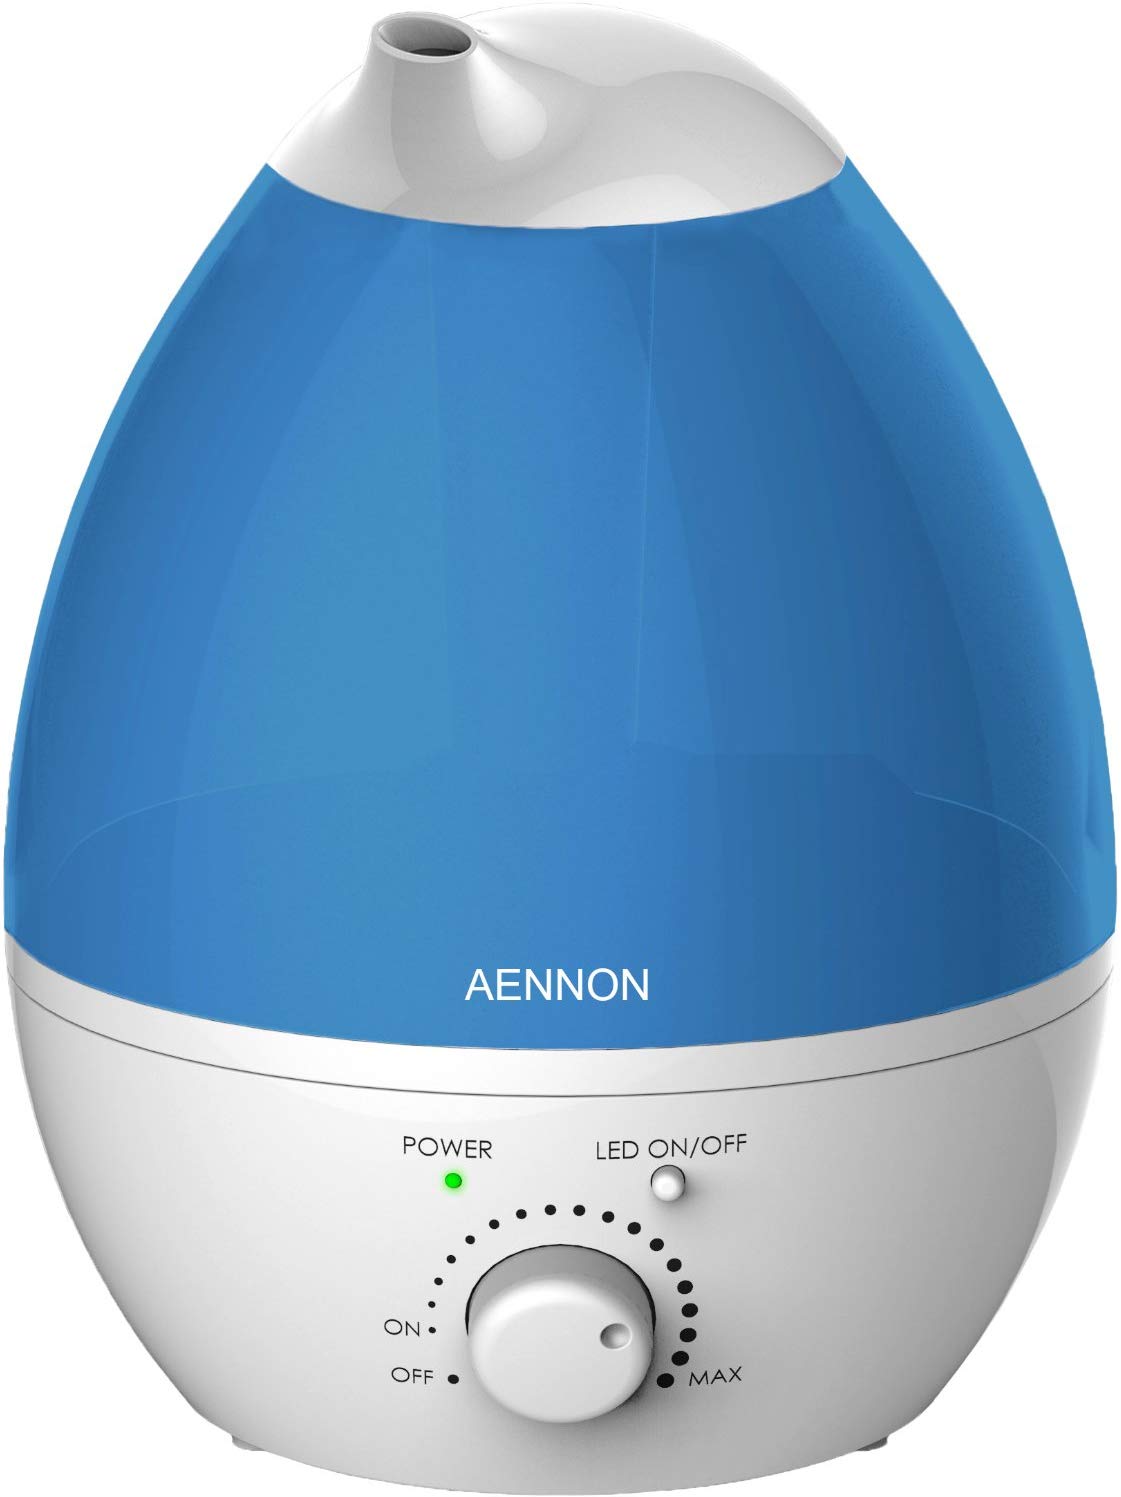 ultrasonic cool mist humidifier review: 